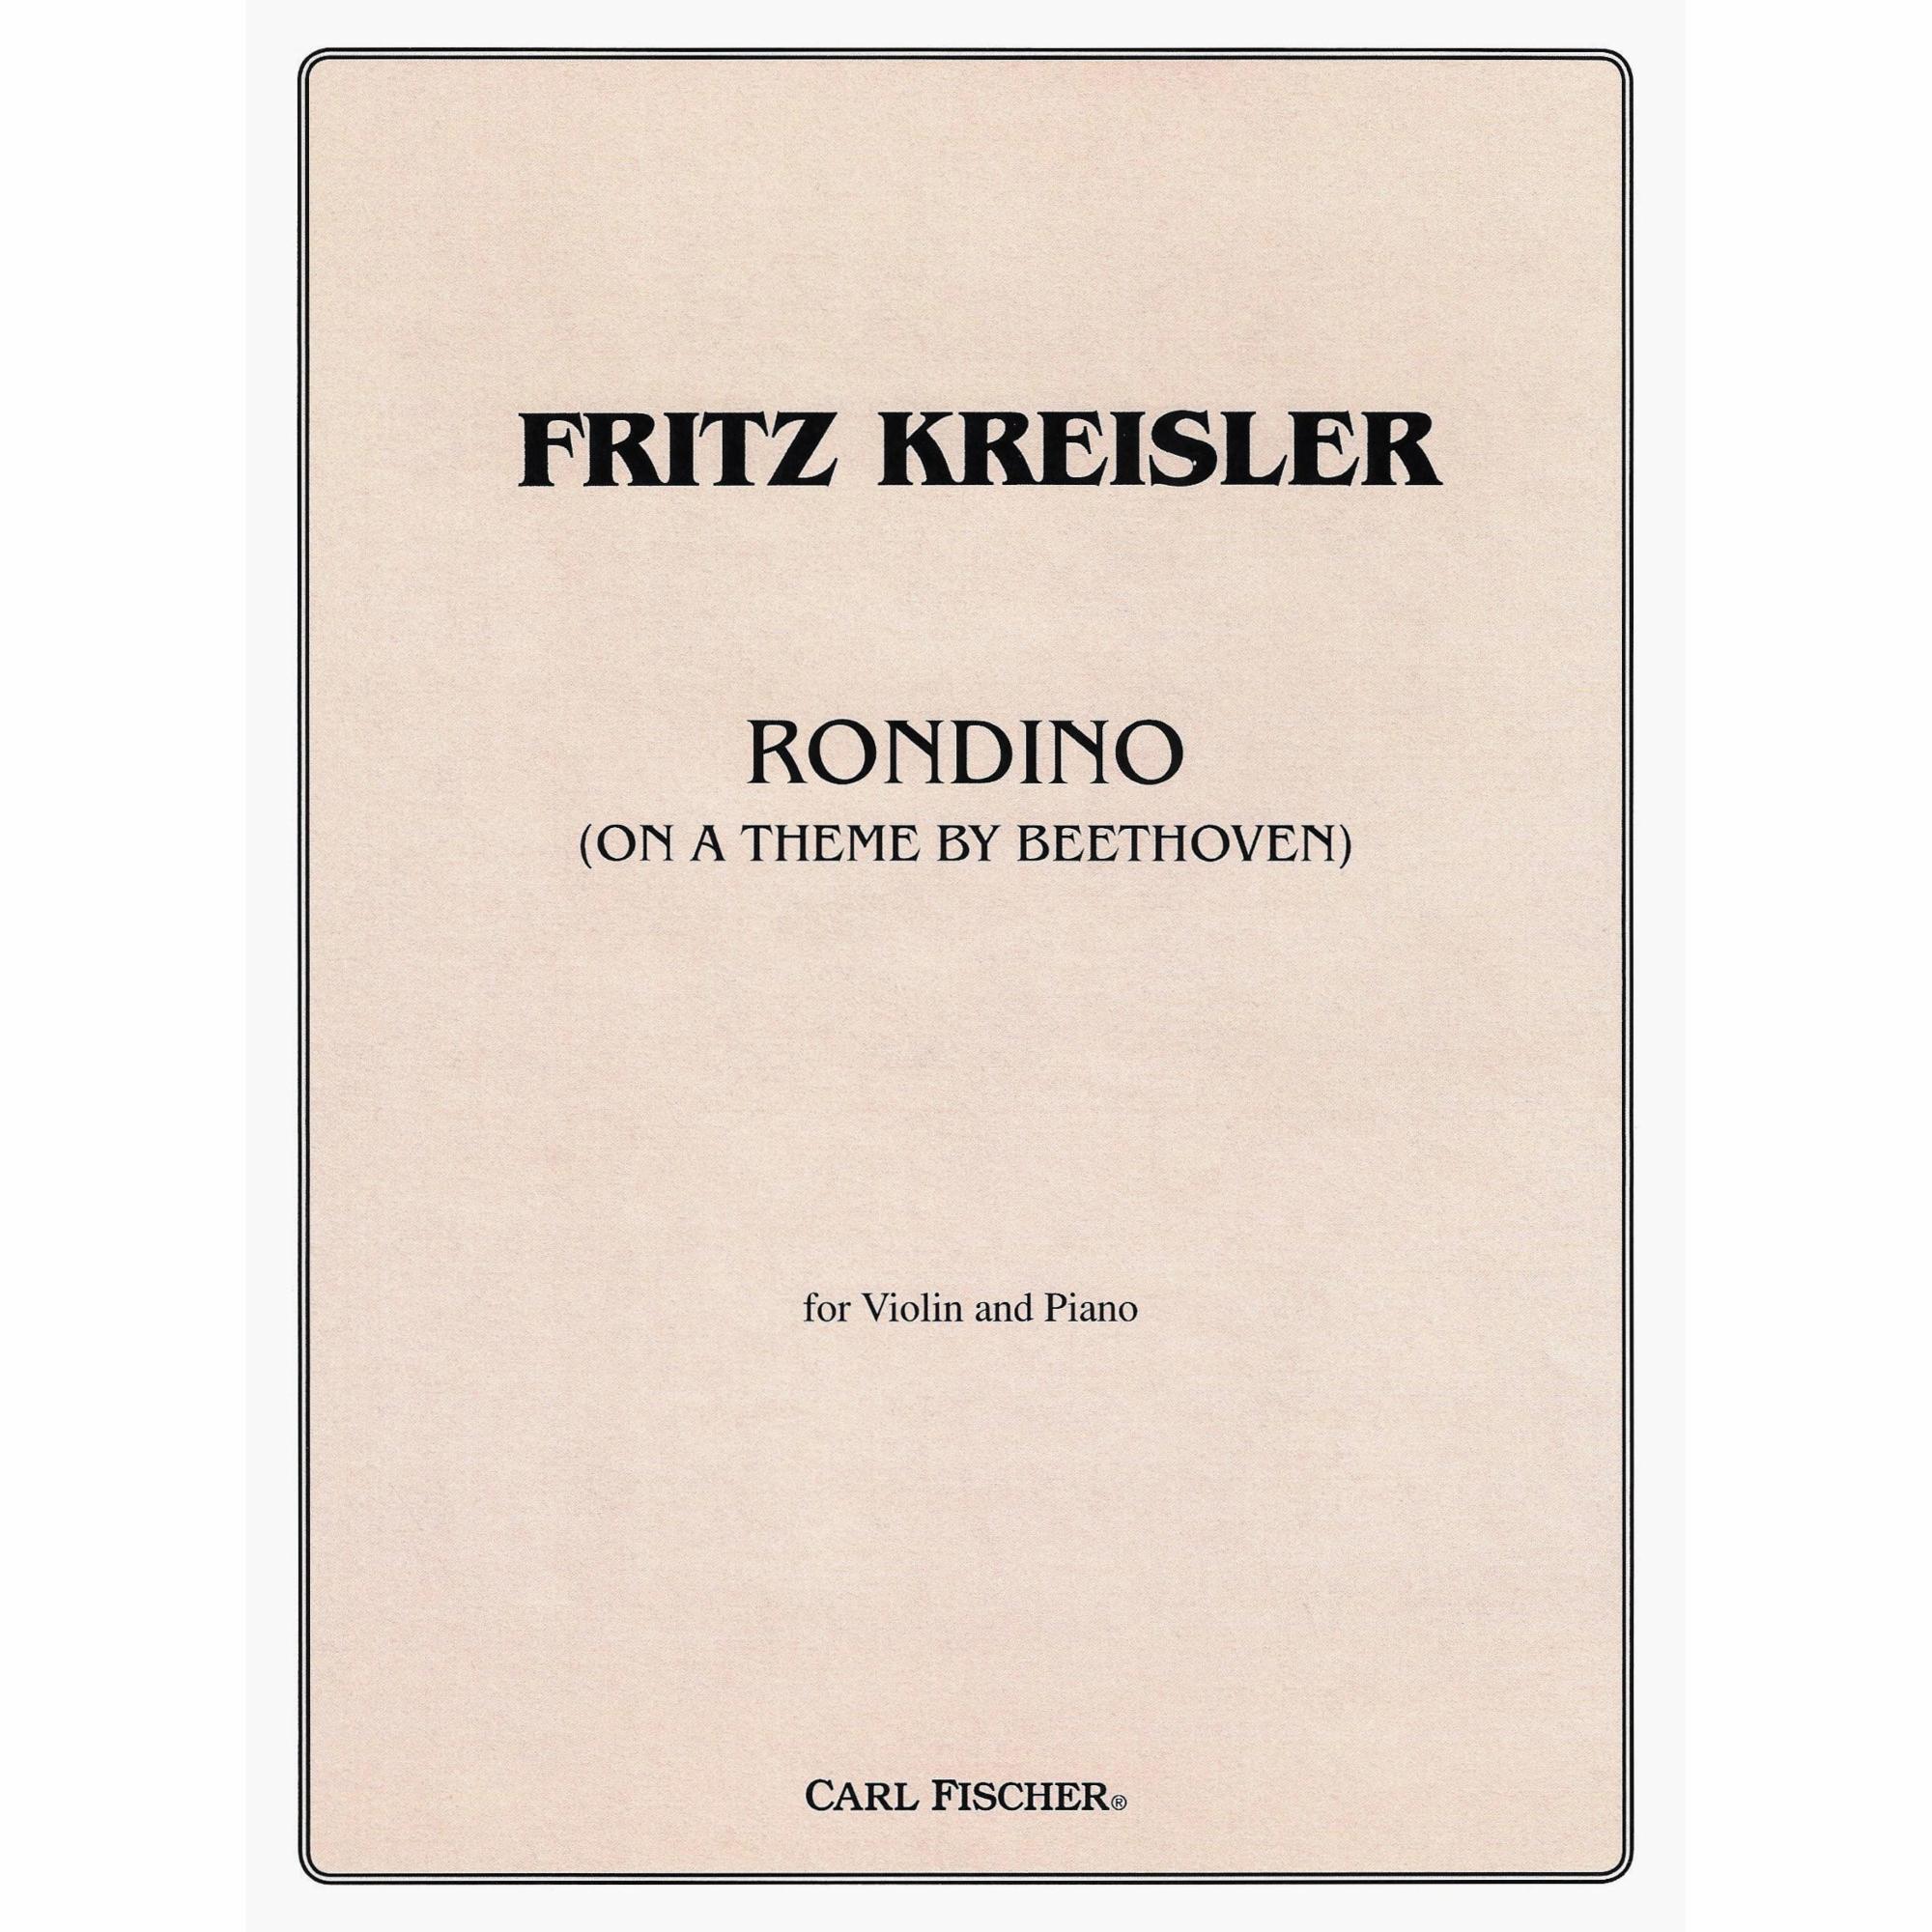 Kreisler -- Rondino on a Theme by Beethoven for Violin and Piano